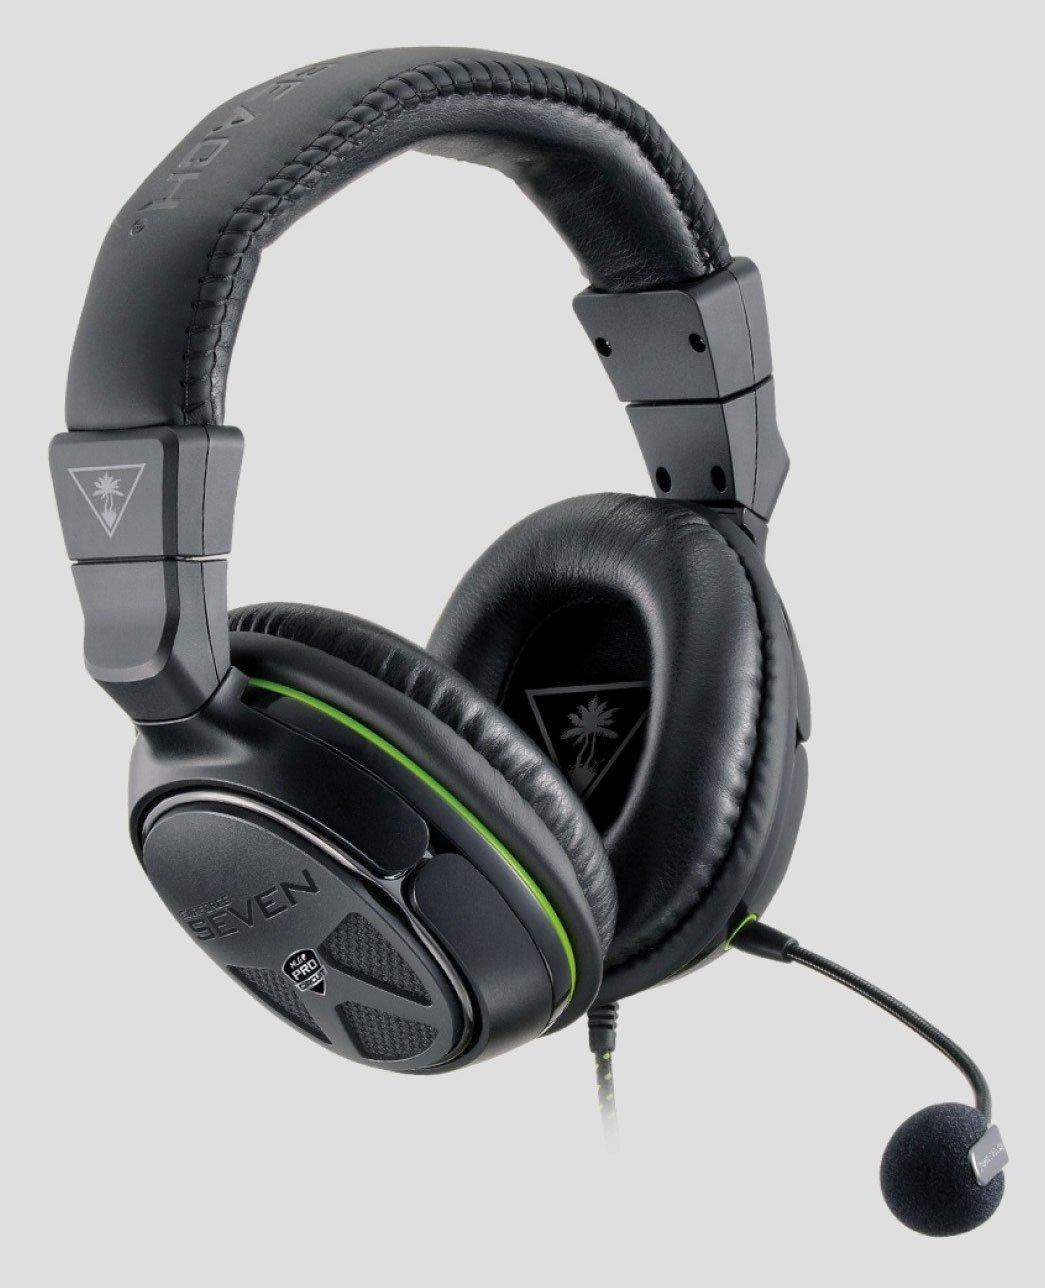 pro gaming headset for xbox one